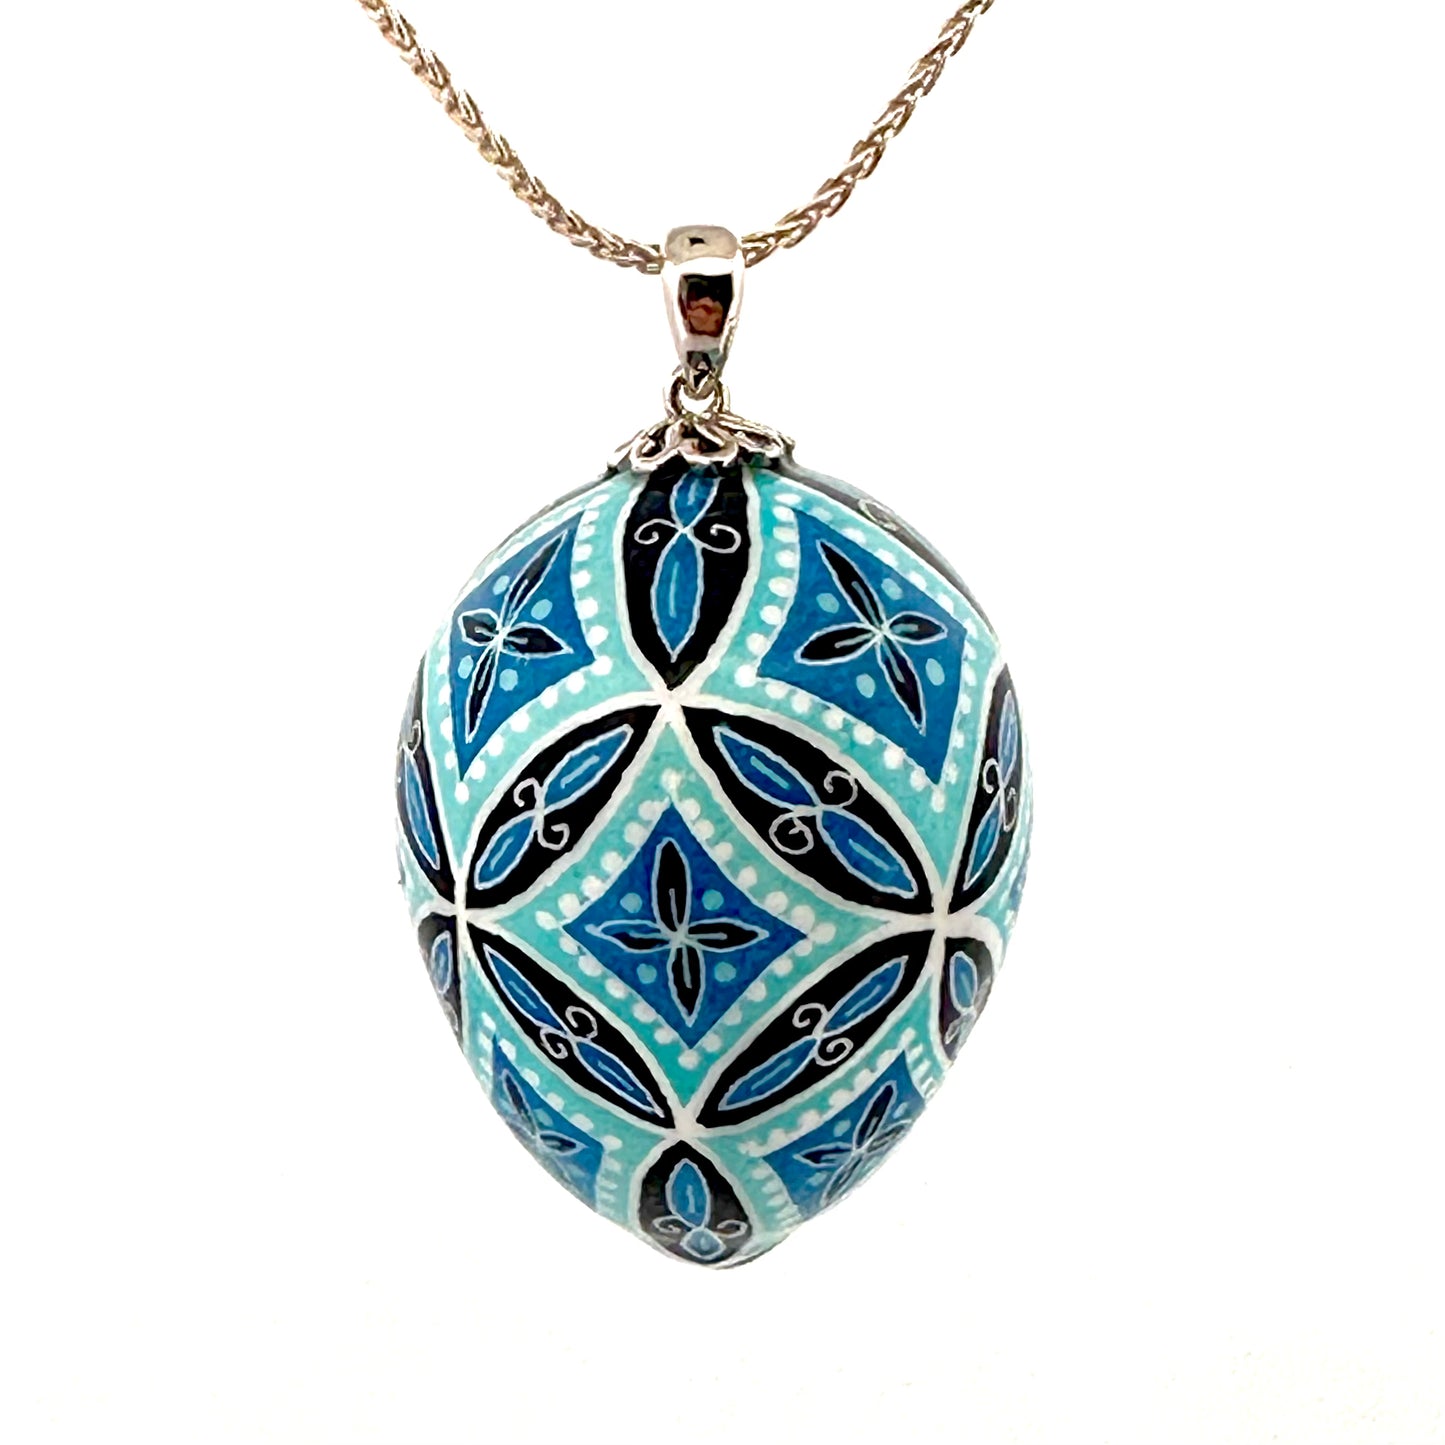 Filled whole quail Pysanky necklace